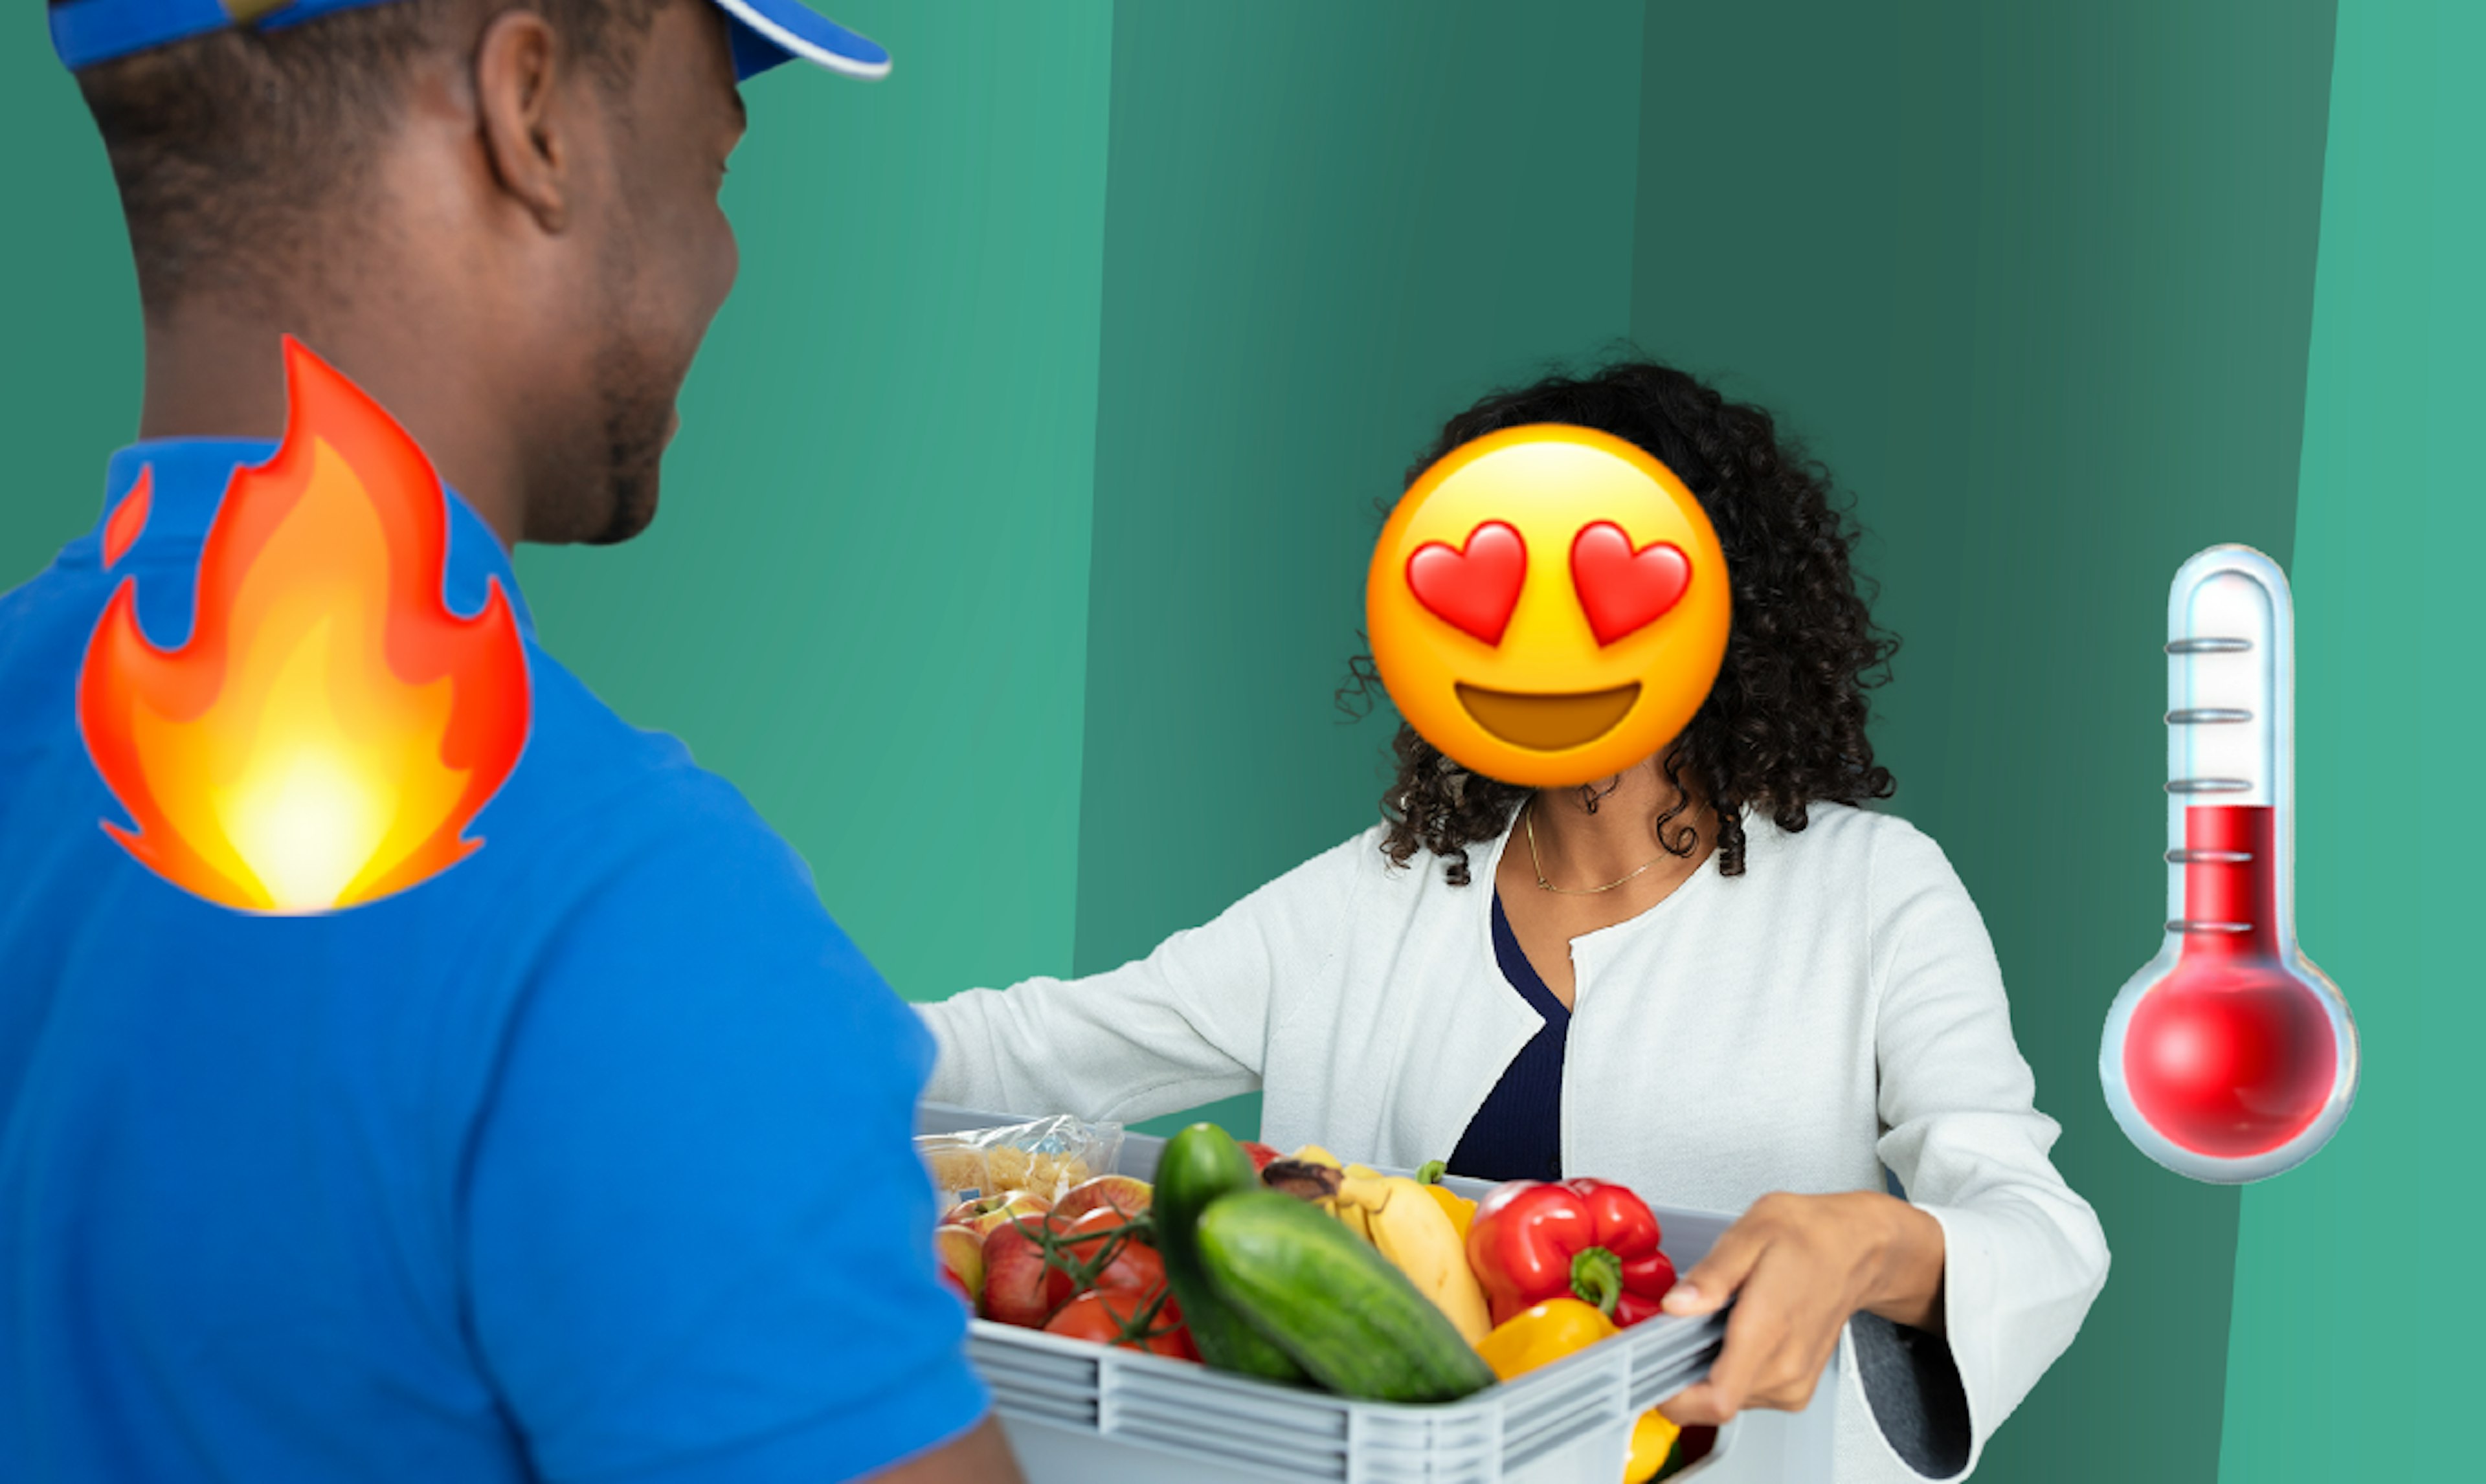 Grocery delivery driver in a blue baseball hat and shirt passing a crate of vegetables to a customer. The customer has a happy face with heart eyes emoji as their head